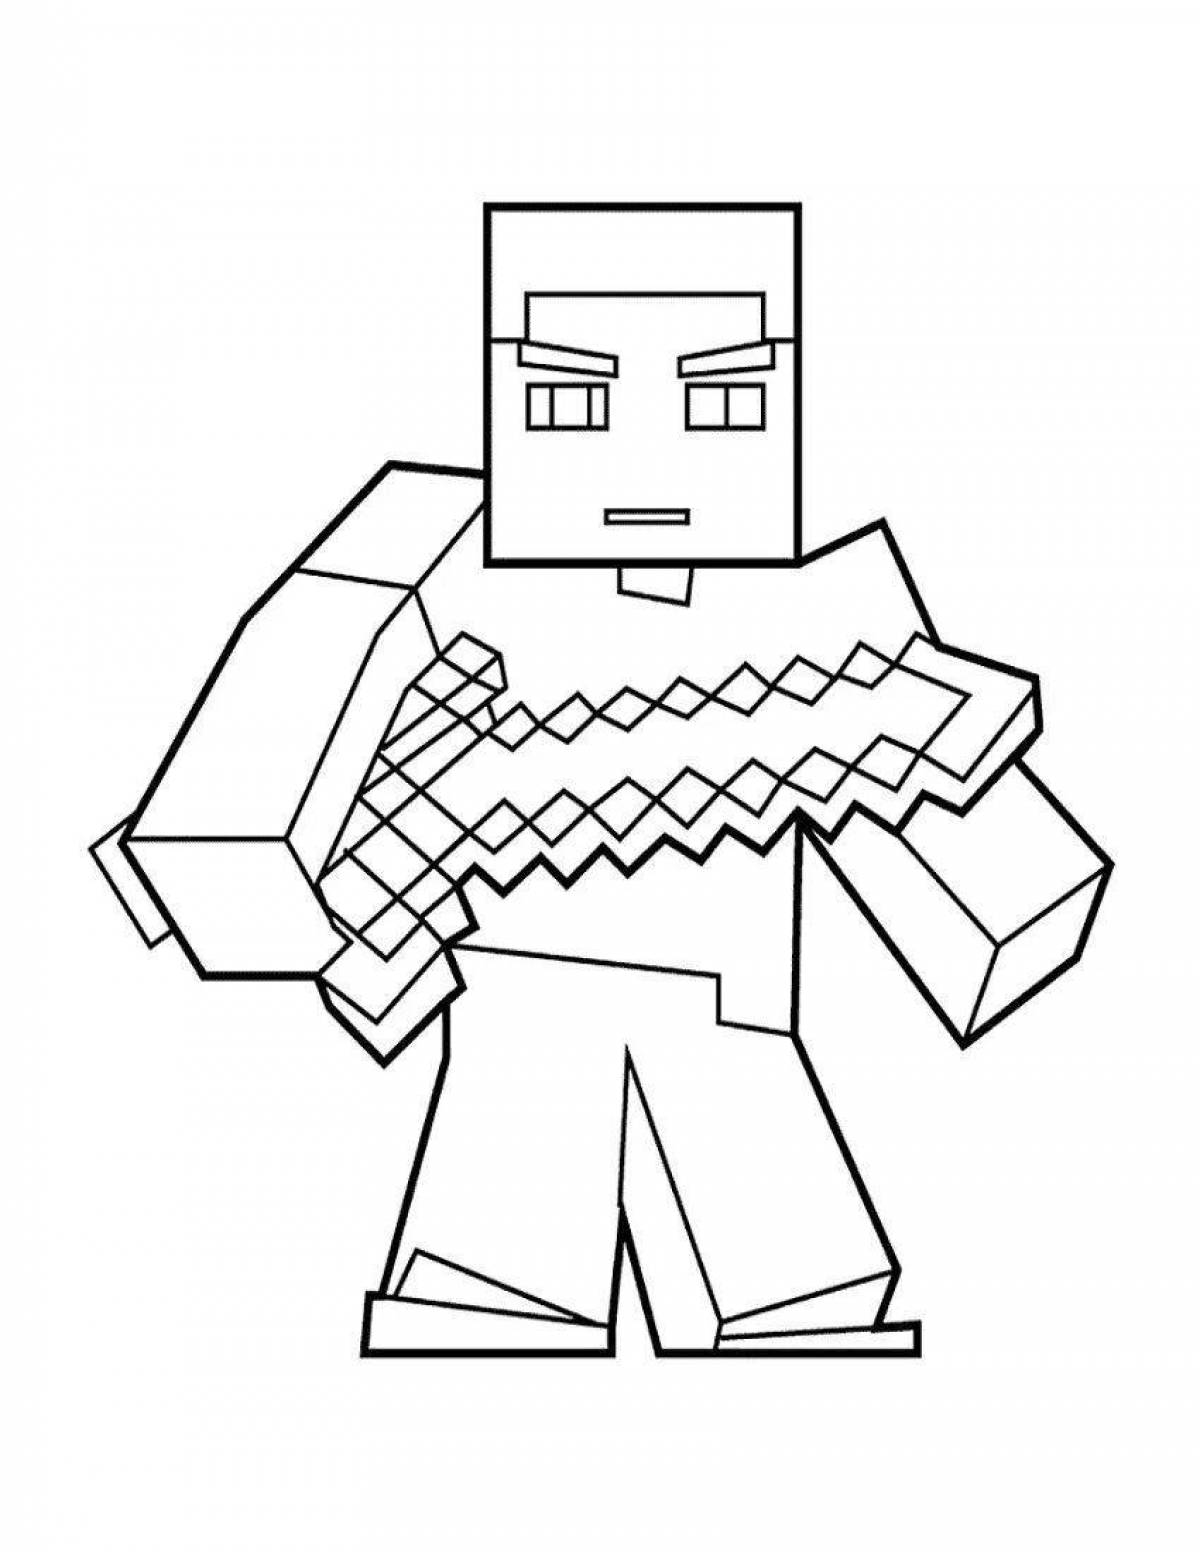 Colorful minecraft man coloring page